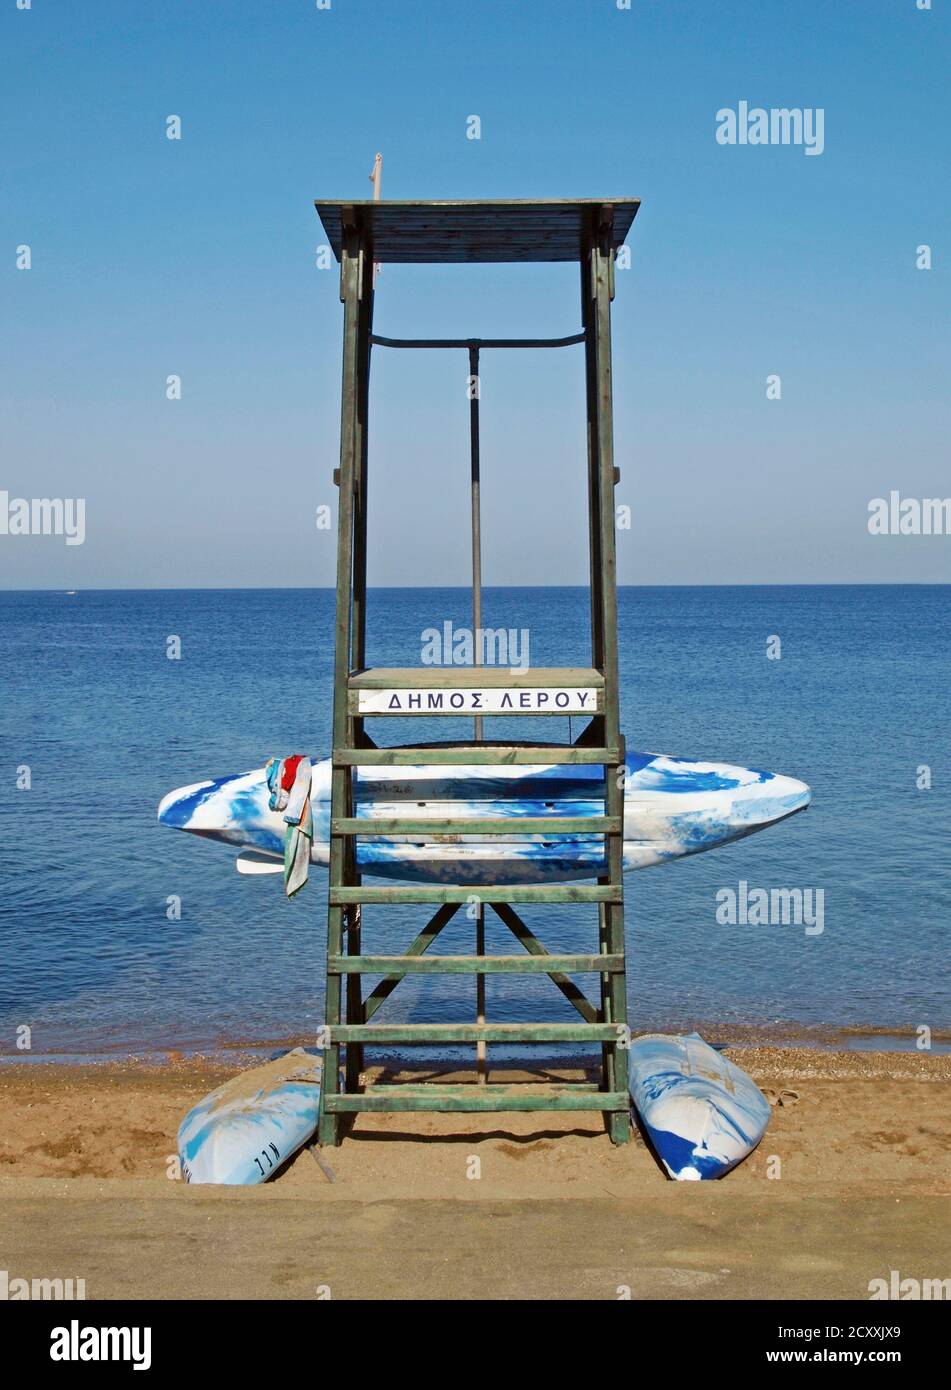 lifeguard tower and surfboards, Leros, Greece Stock Photo